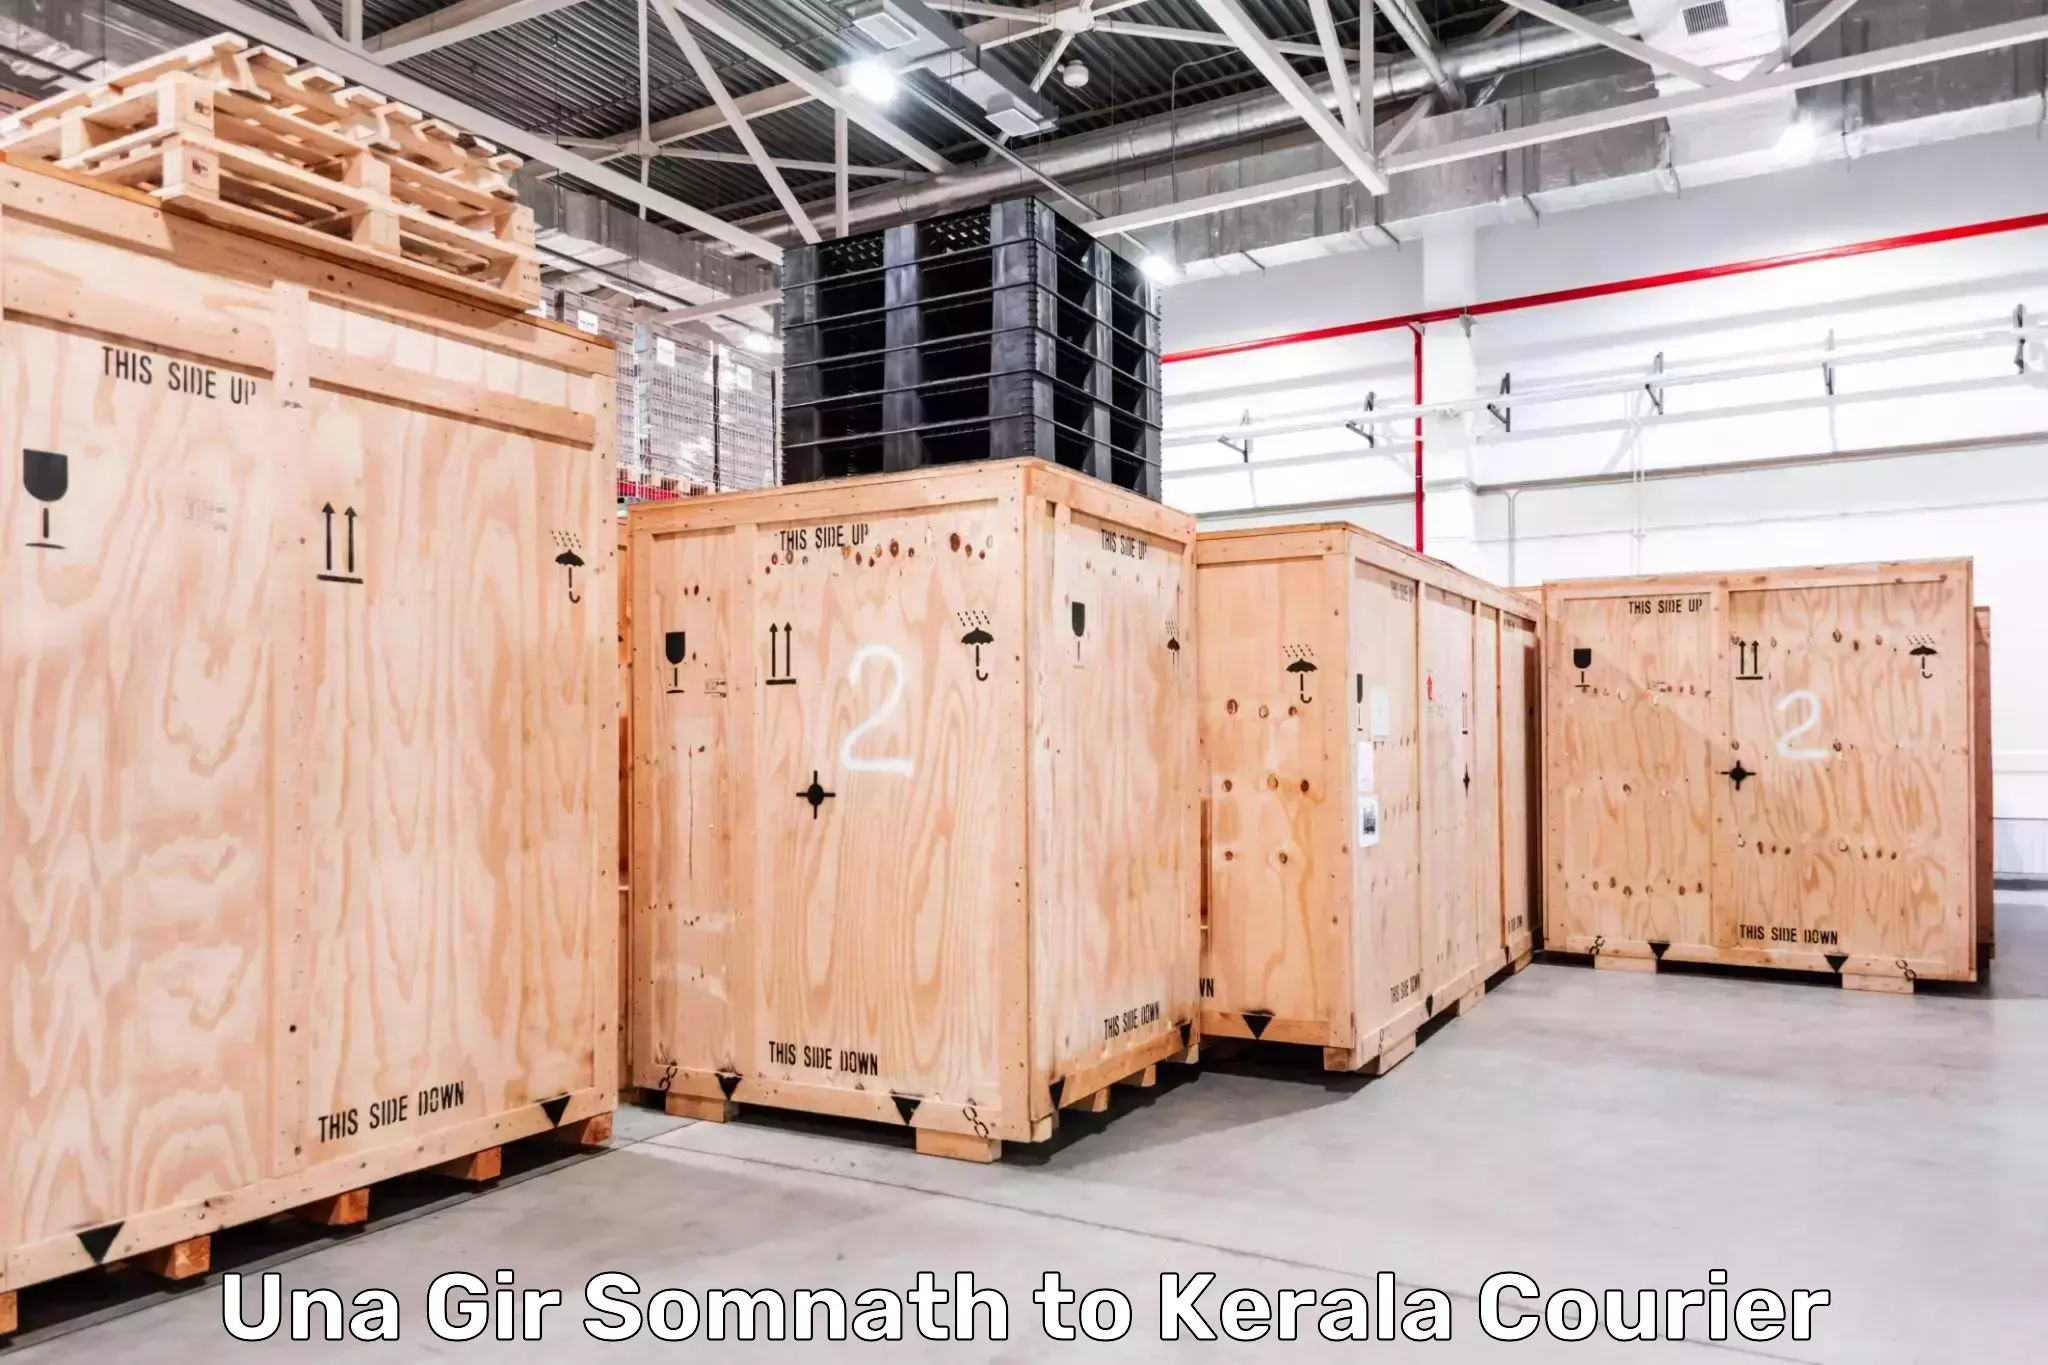 Reliable courier service Una Gir Somnath to Nedumangad